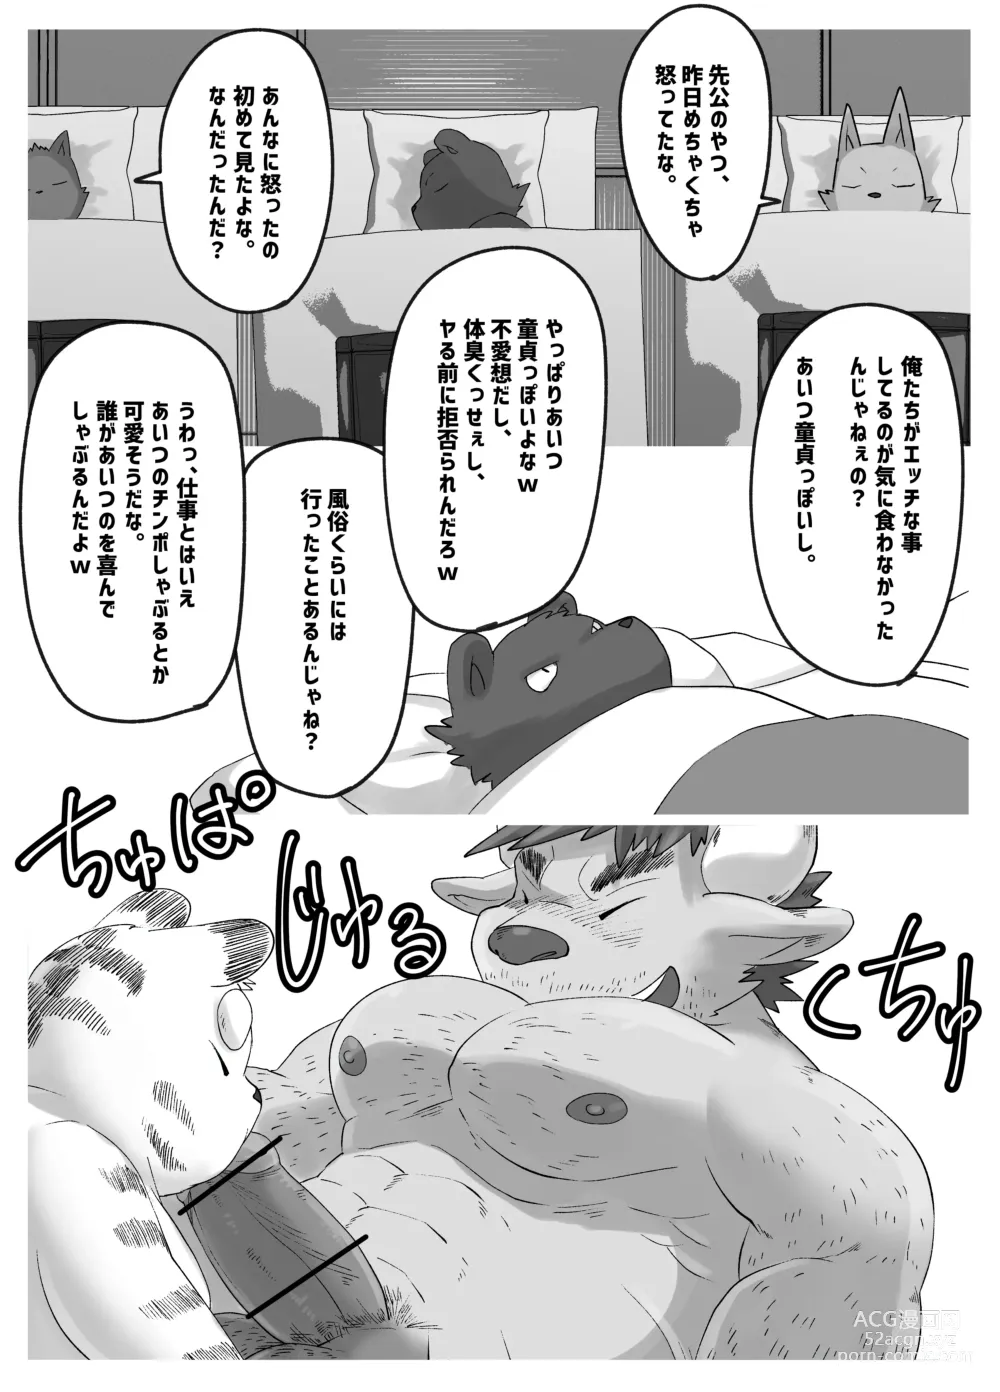 Page 21 of doujinshi Muscular Bull Teacher & Chubby Tiger Student 3